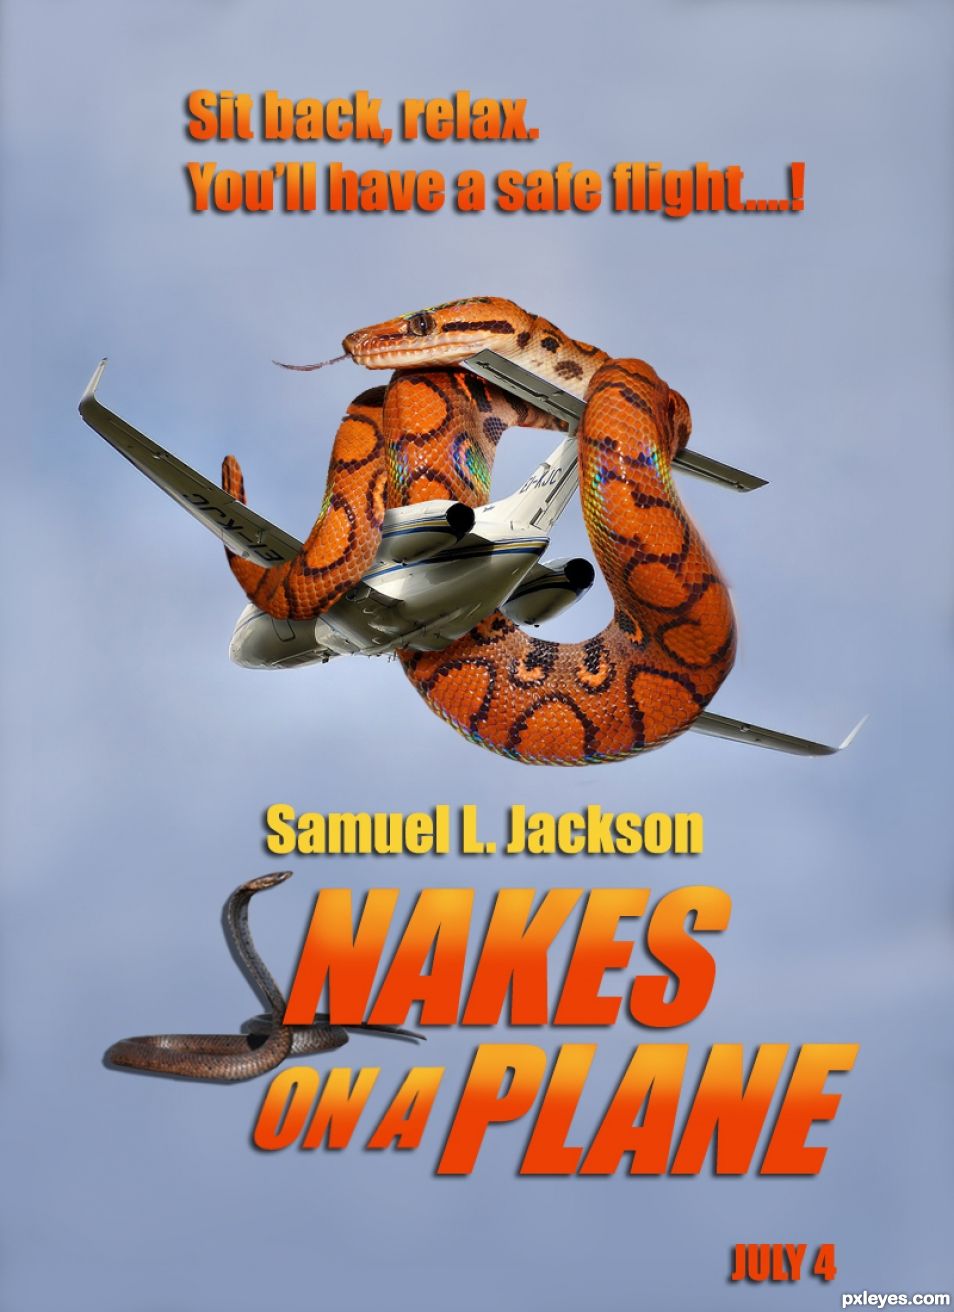 Creation of Snakes On A Plane: Final Result